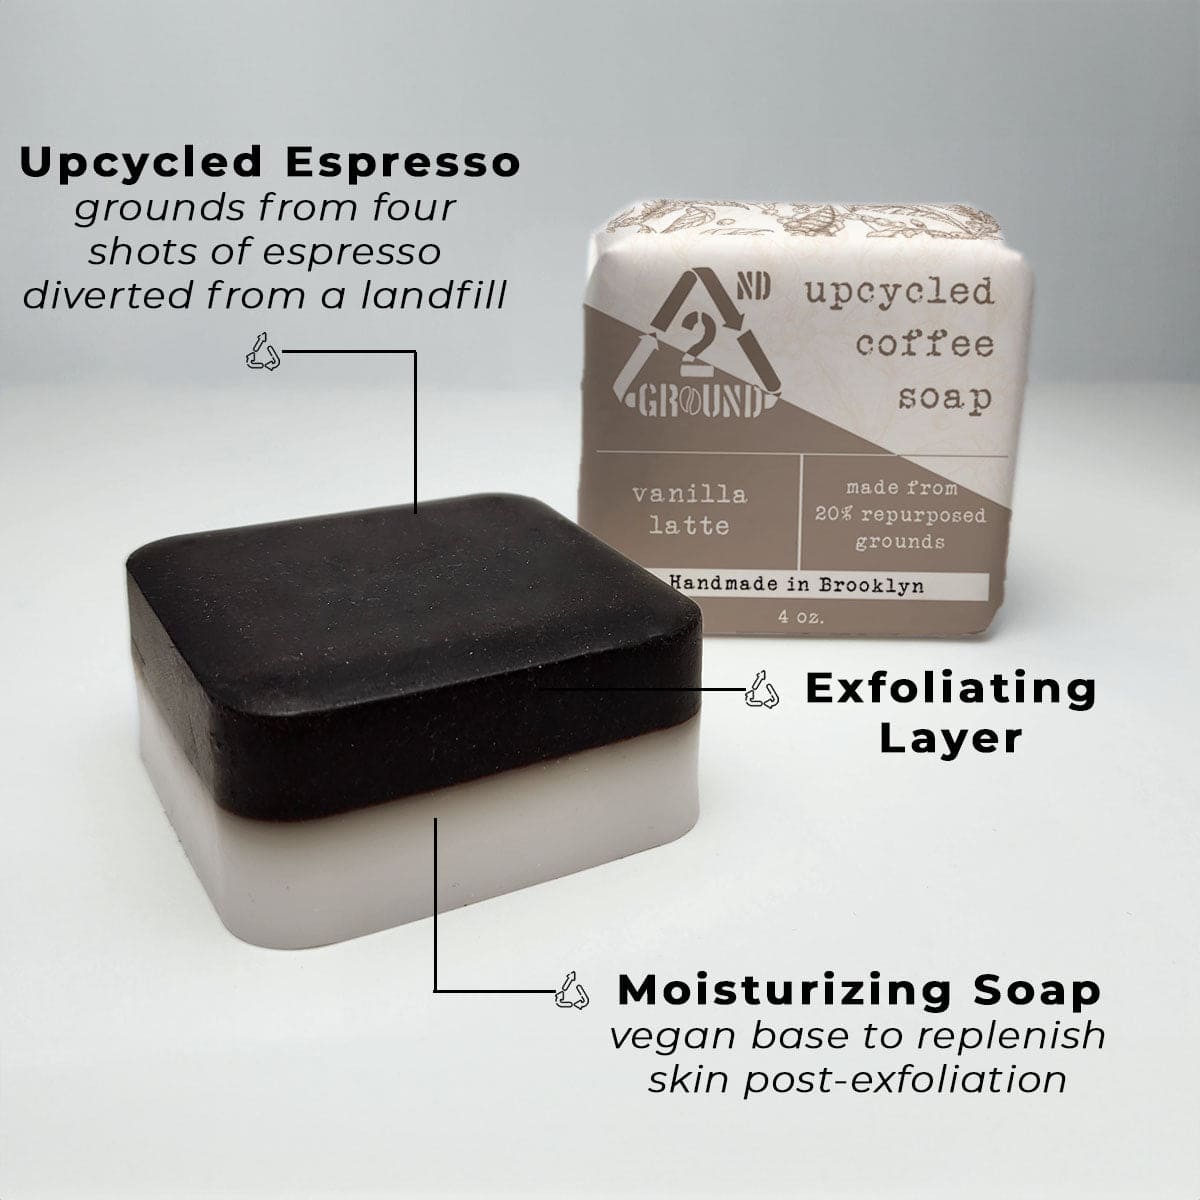 Benefits of vanilla latte upcycled coffee soap